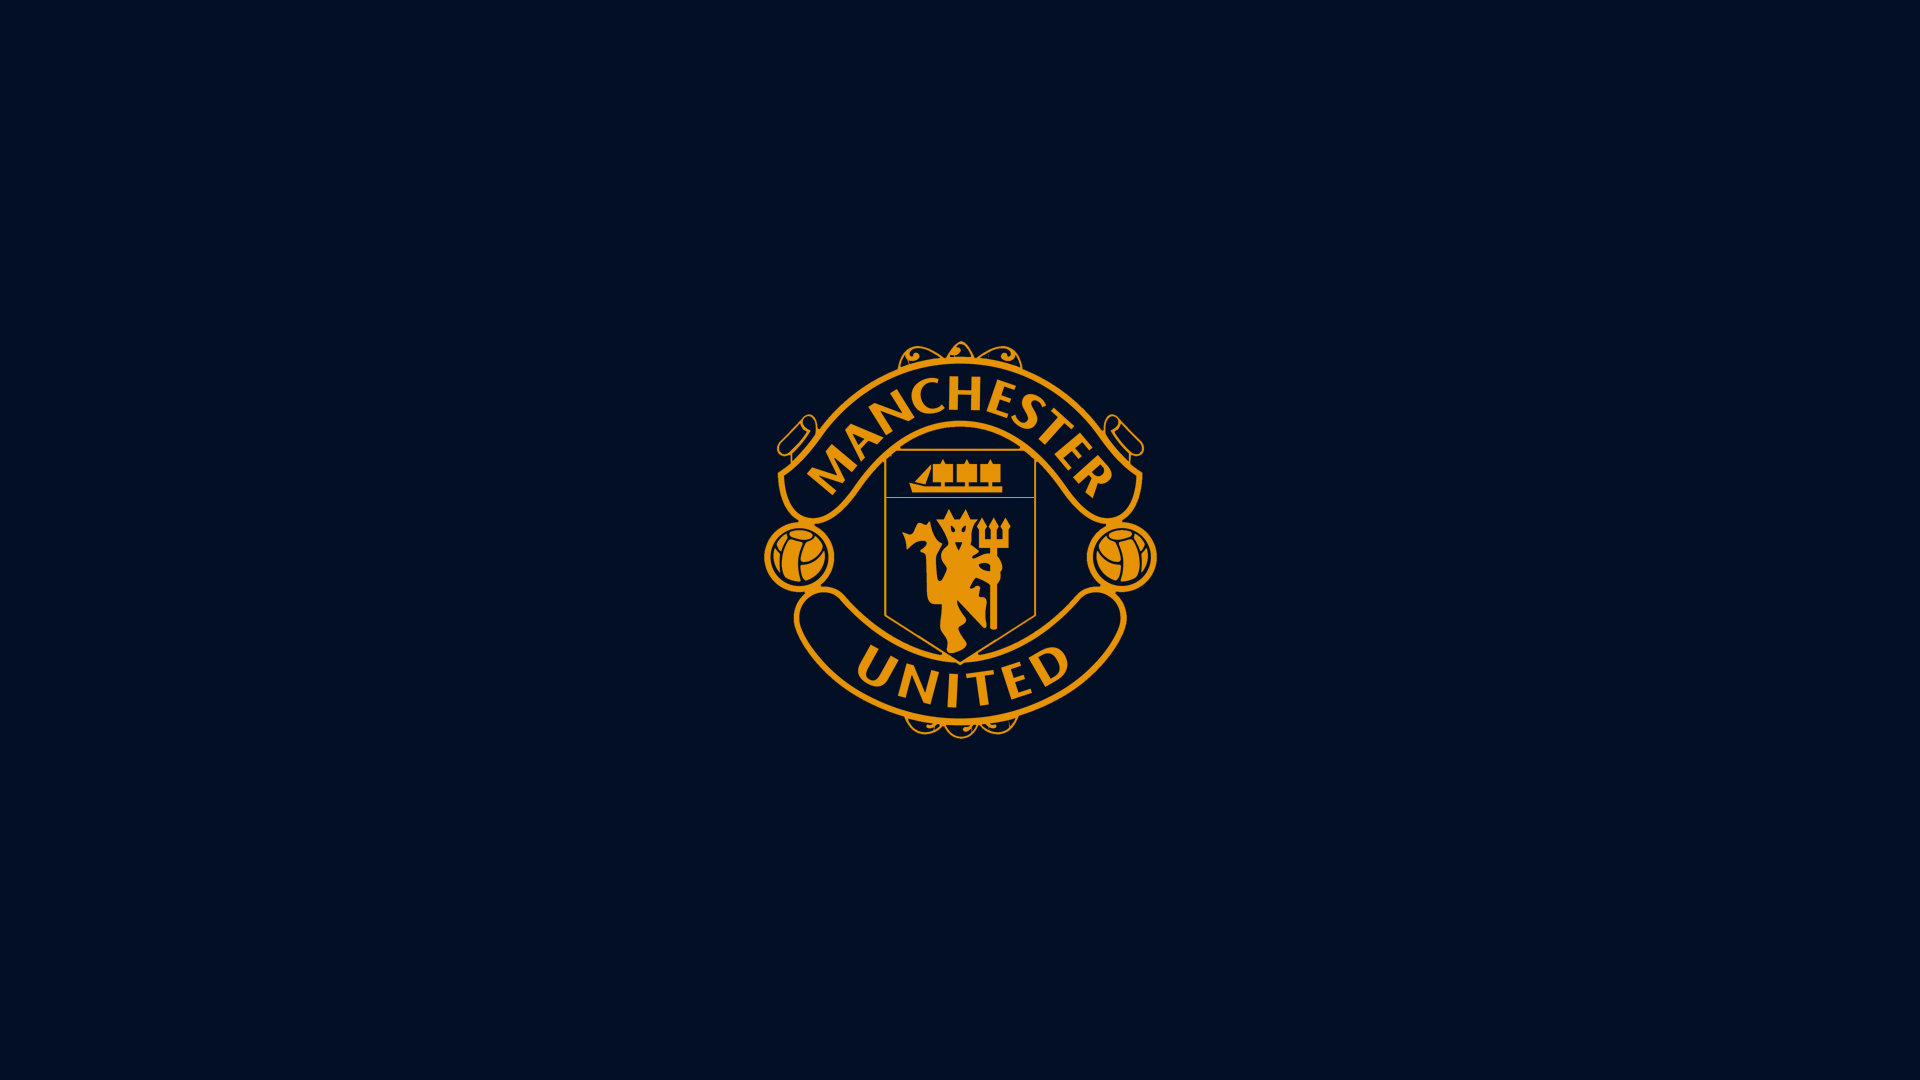 Manchester United Wallpaper Image Photos Pictures